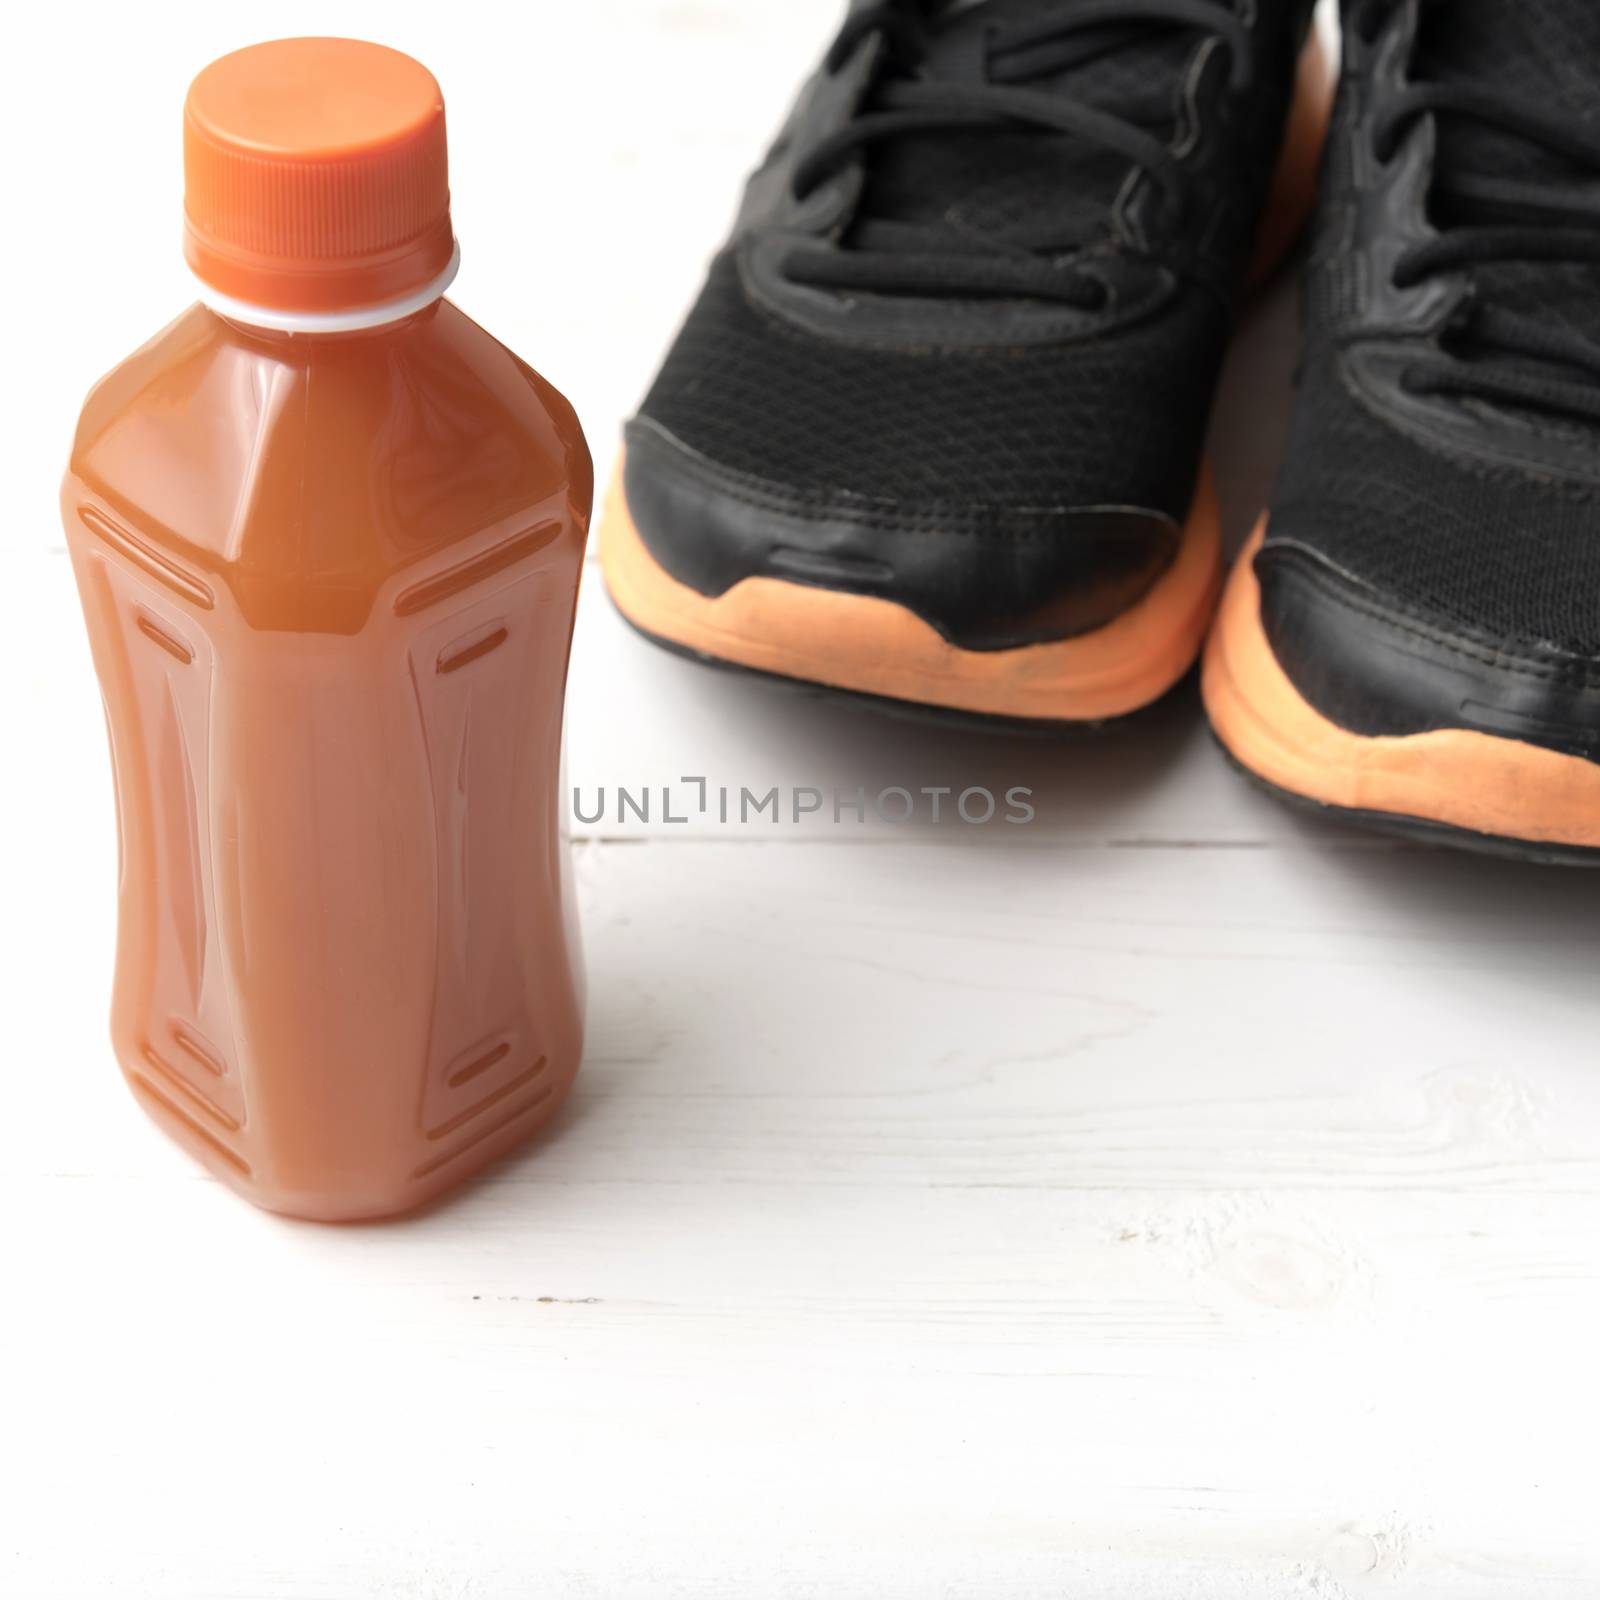 running shoes and orange juice by ammza12